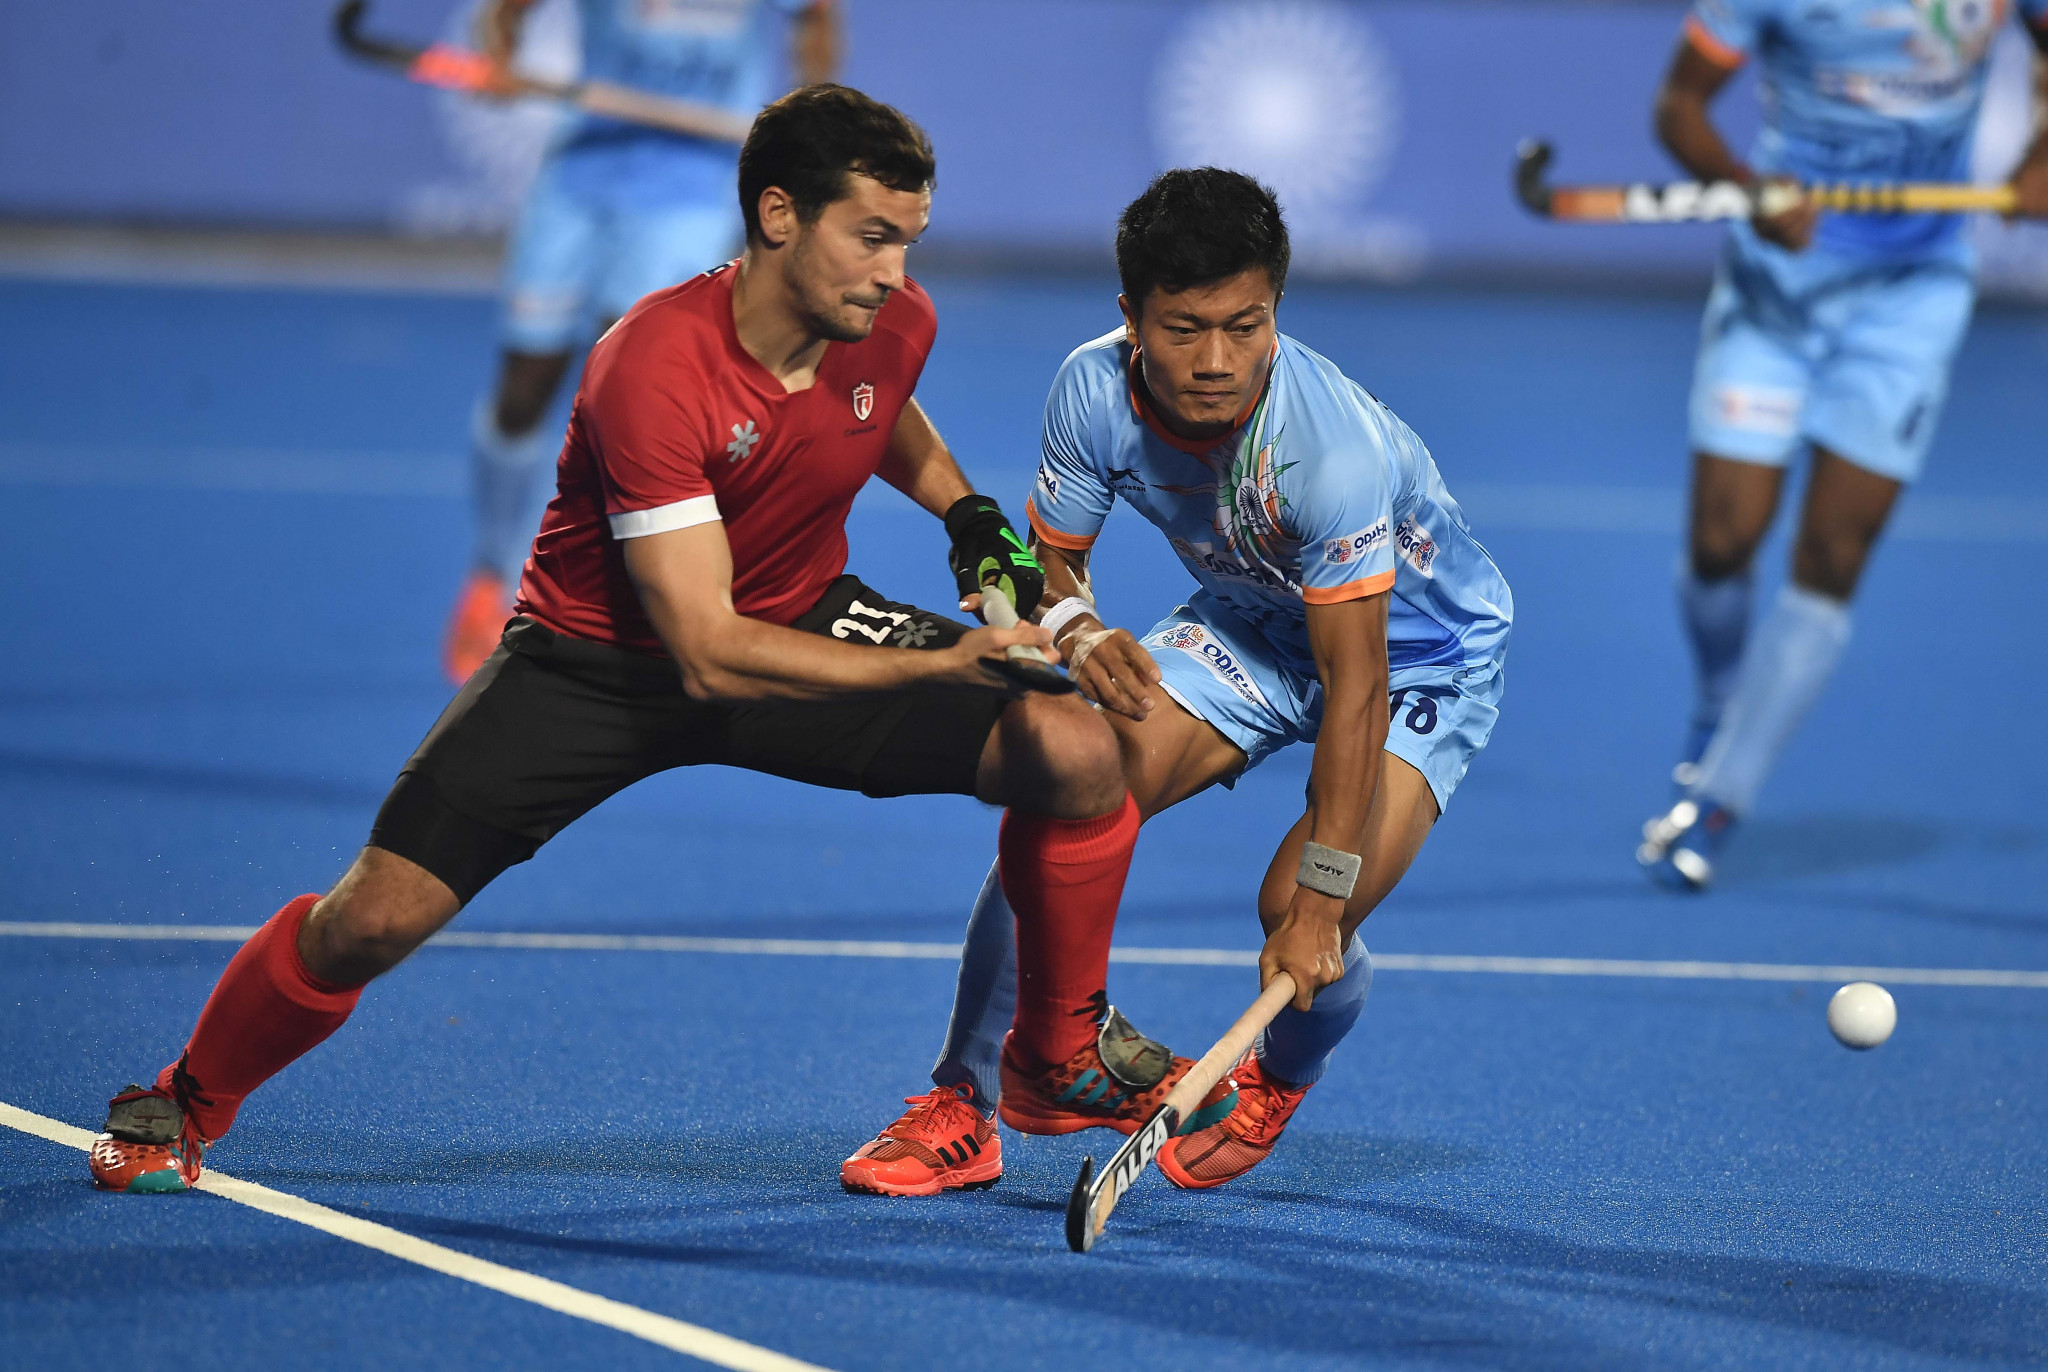 Hosts India qualify directly for last eight at Hockey Men's World Cup after Canada thrashing